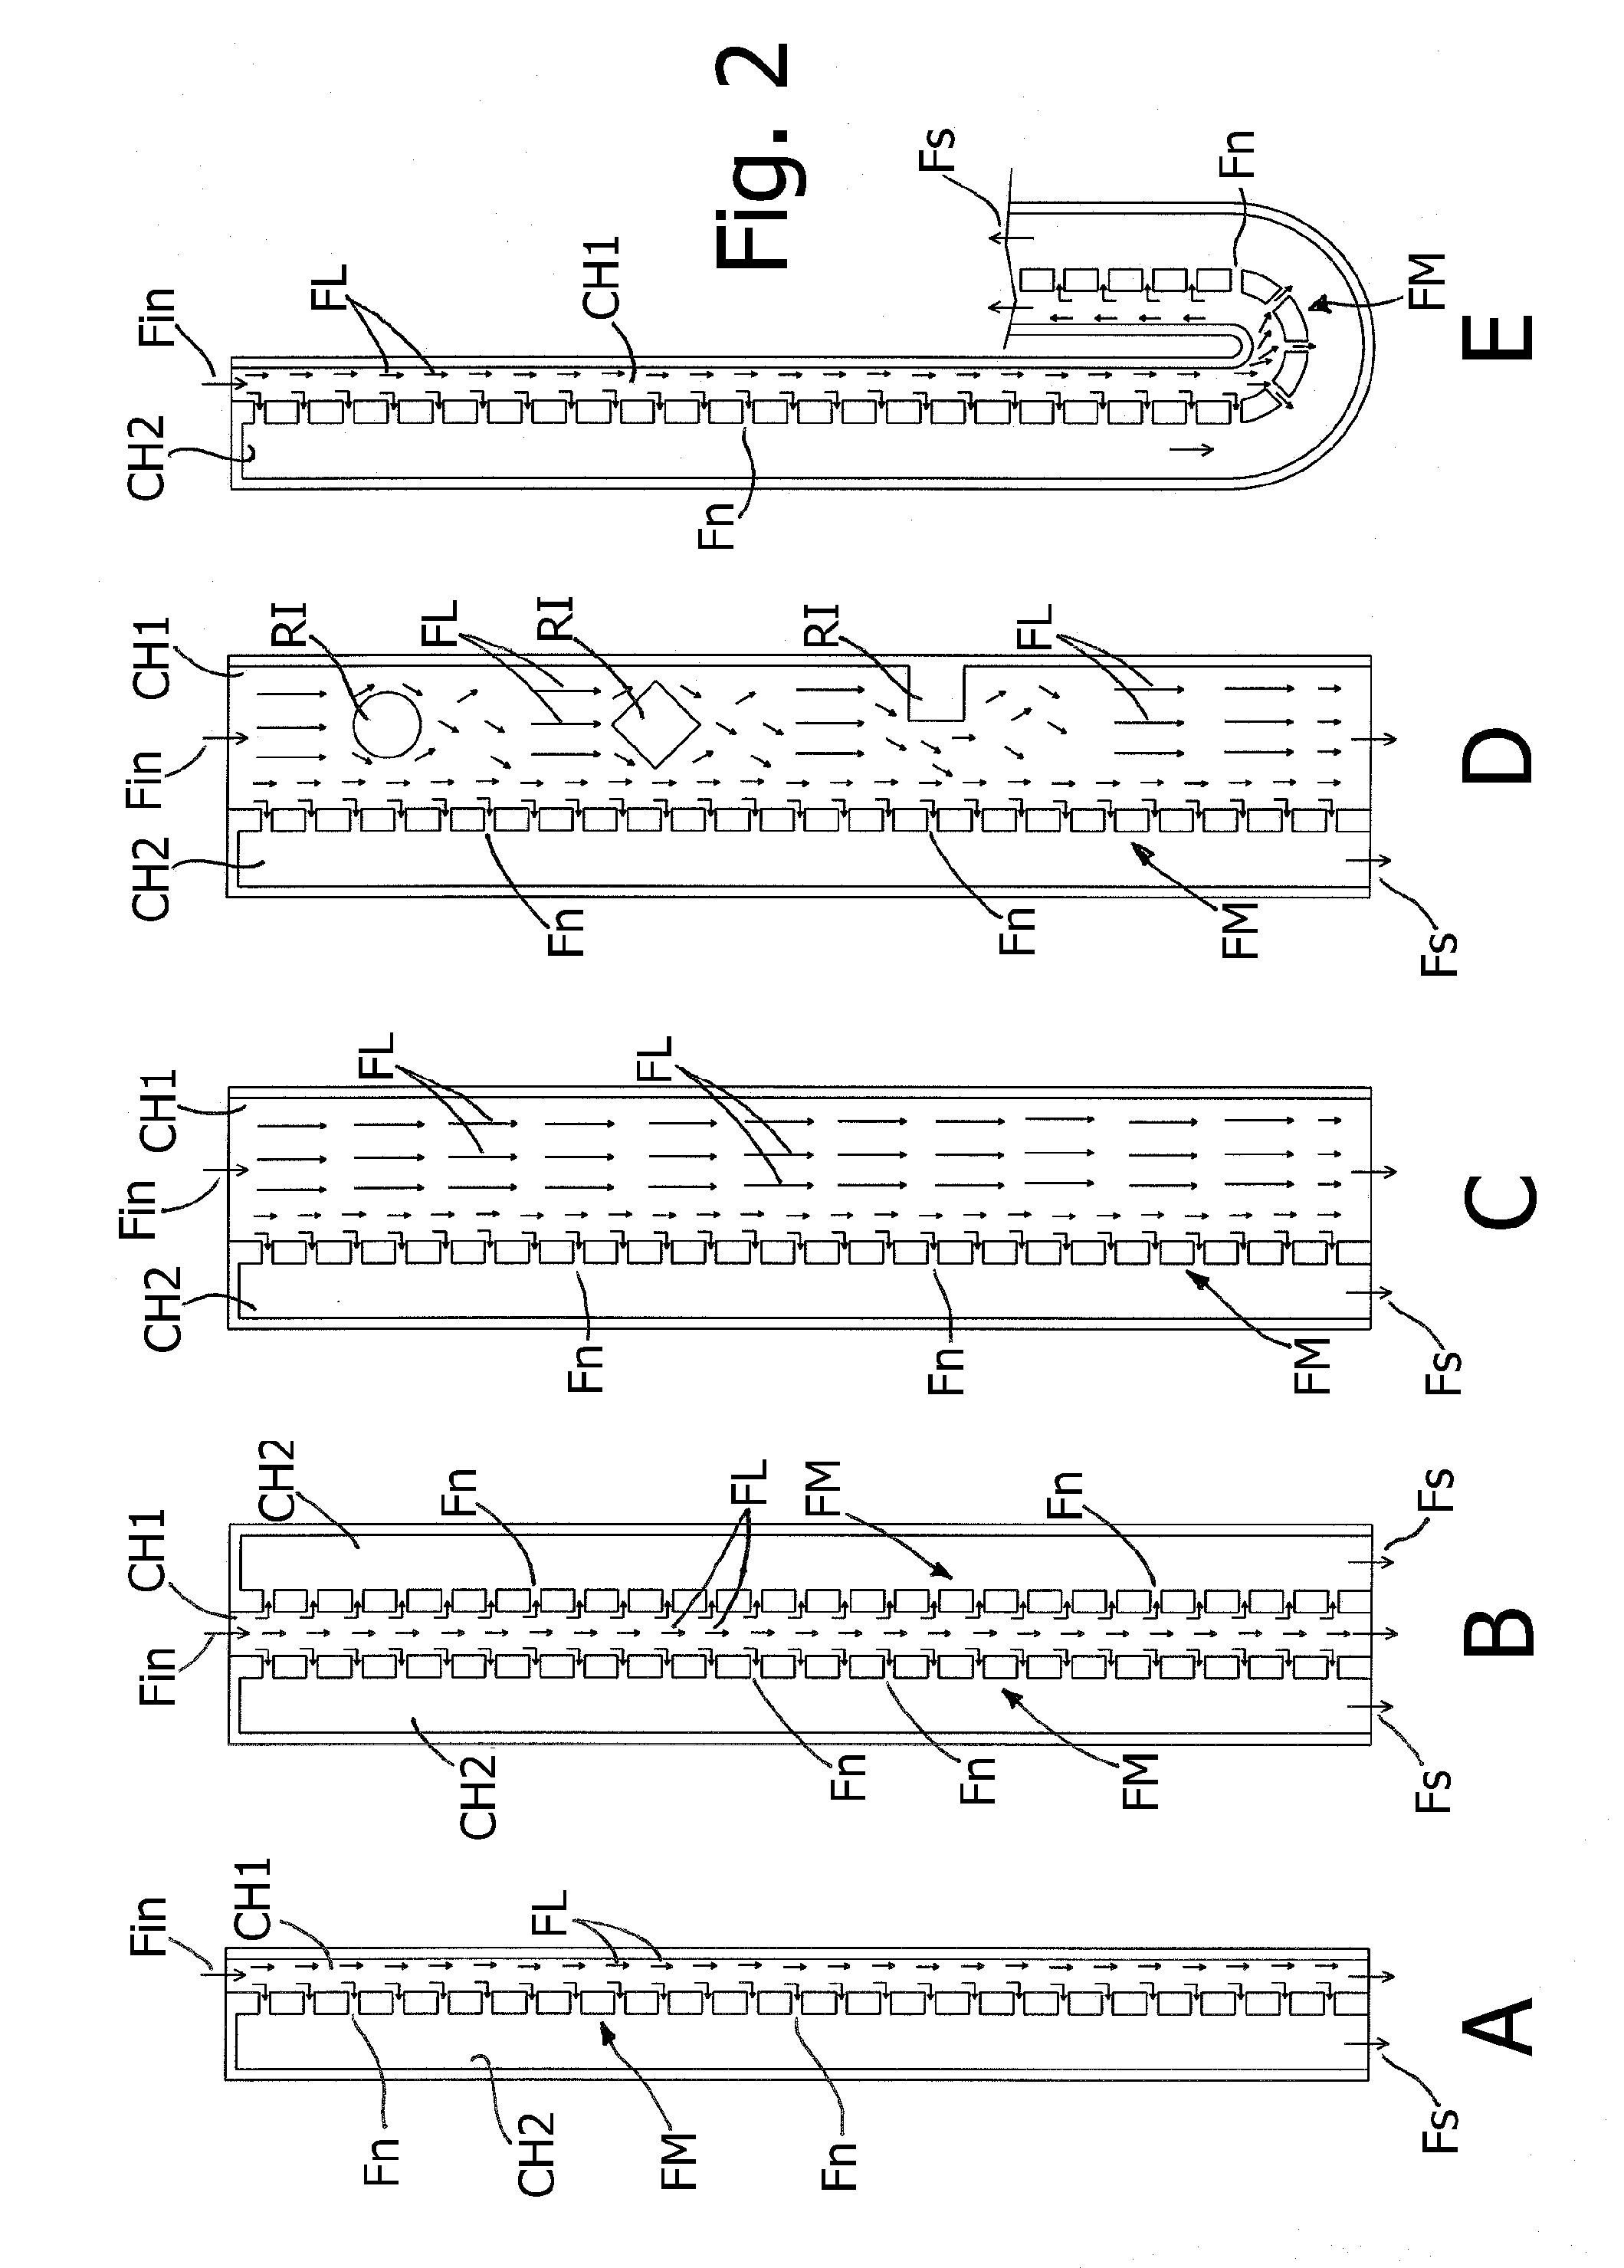 Microfluidic devices and/or equipment for microfluidic devices